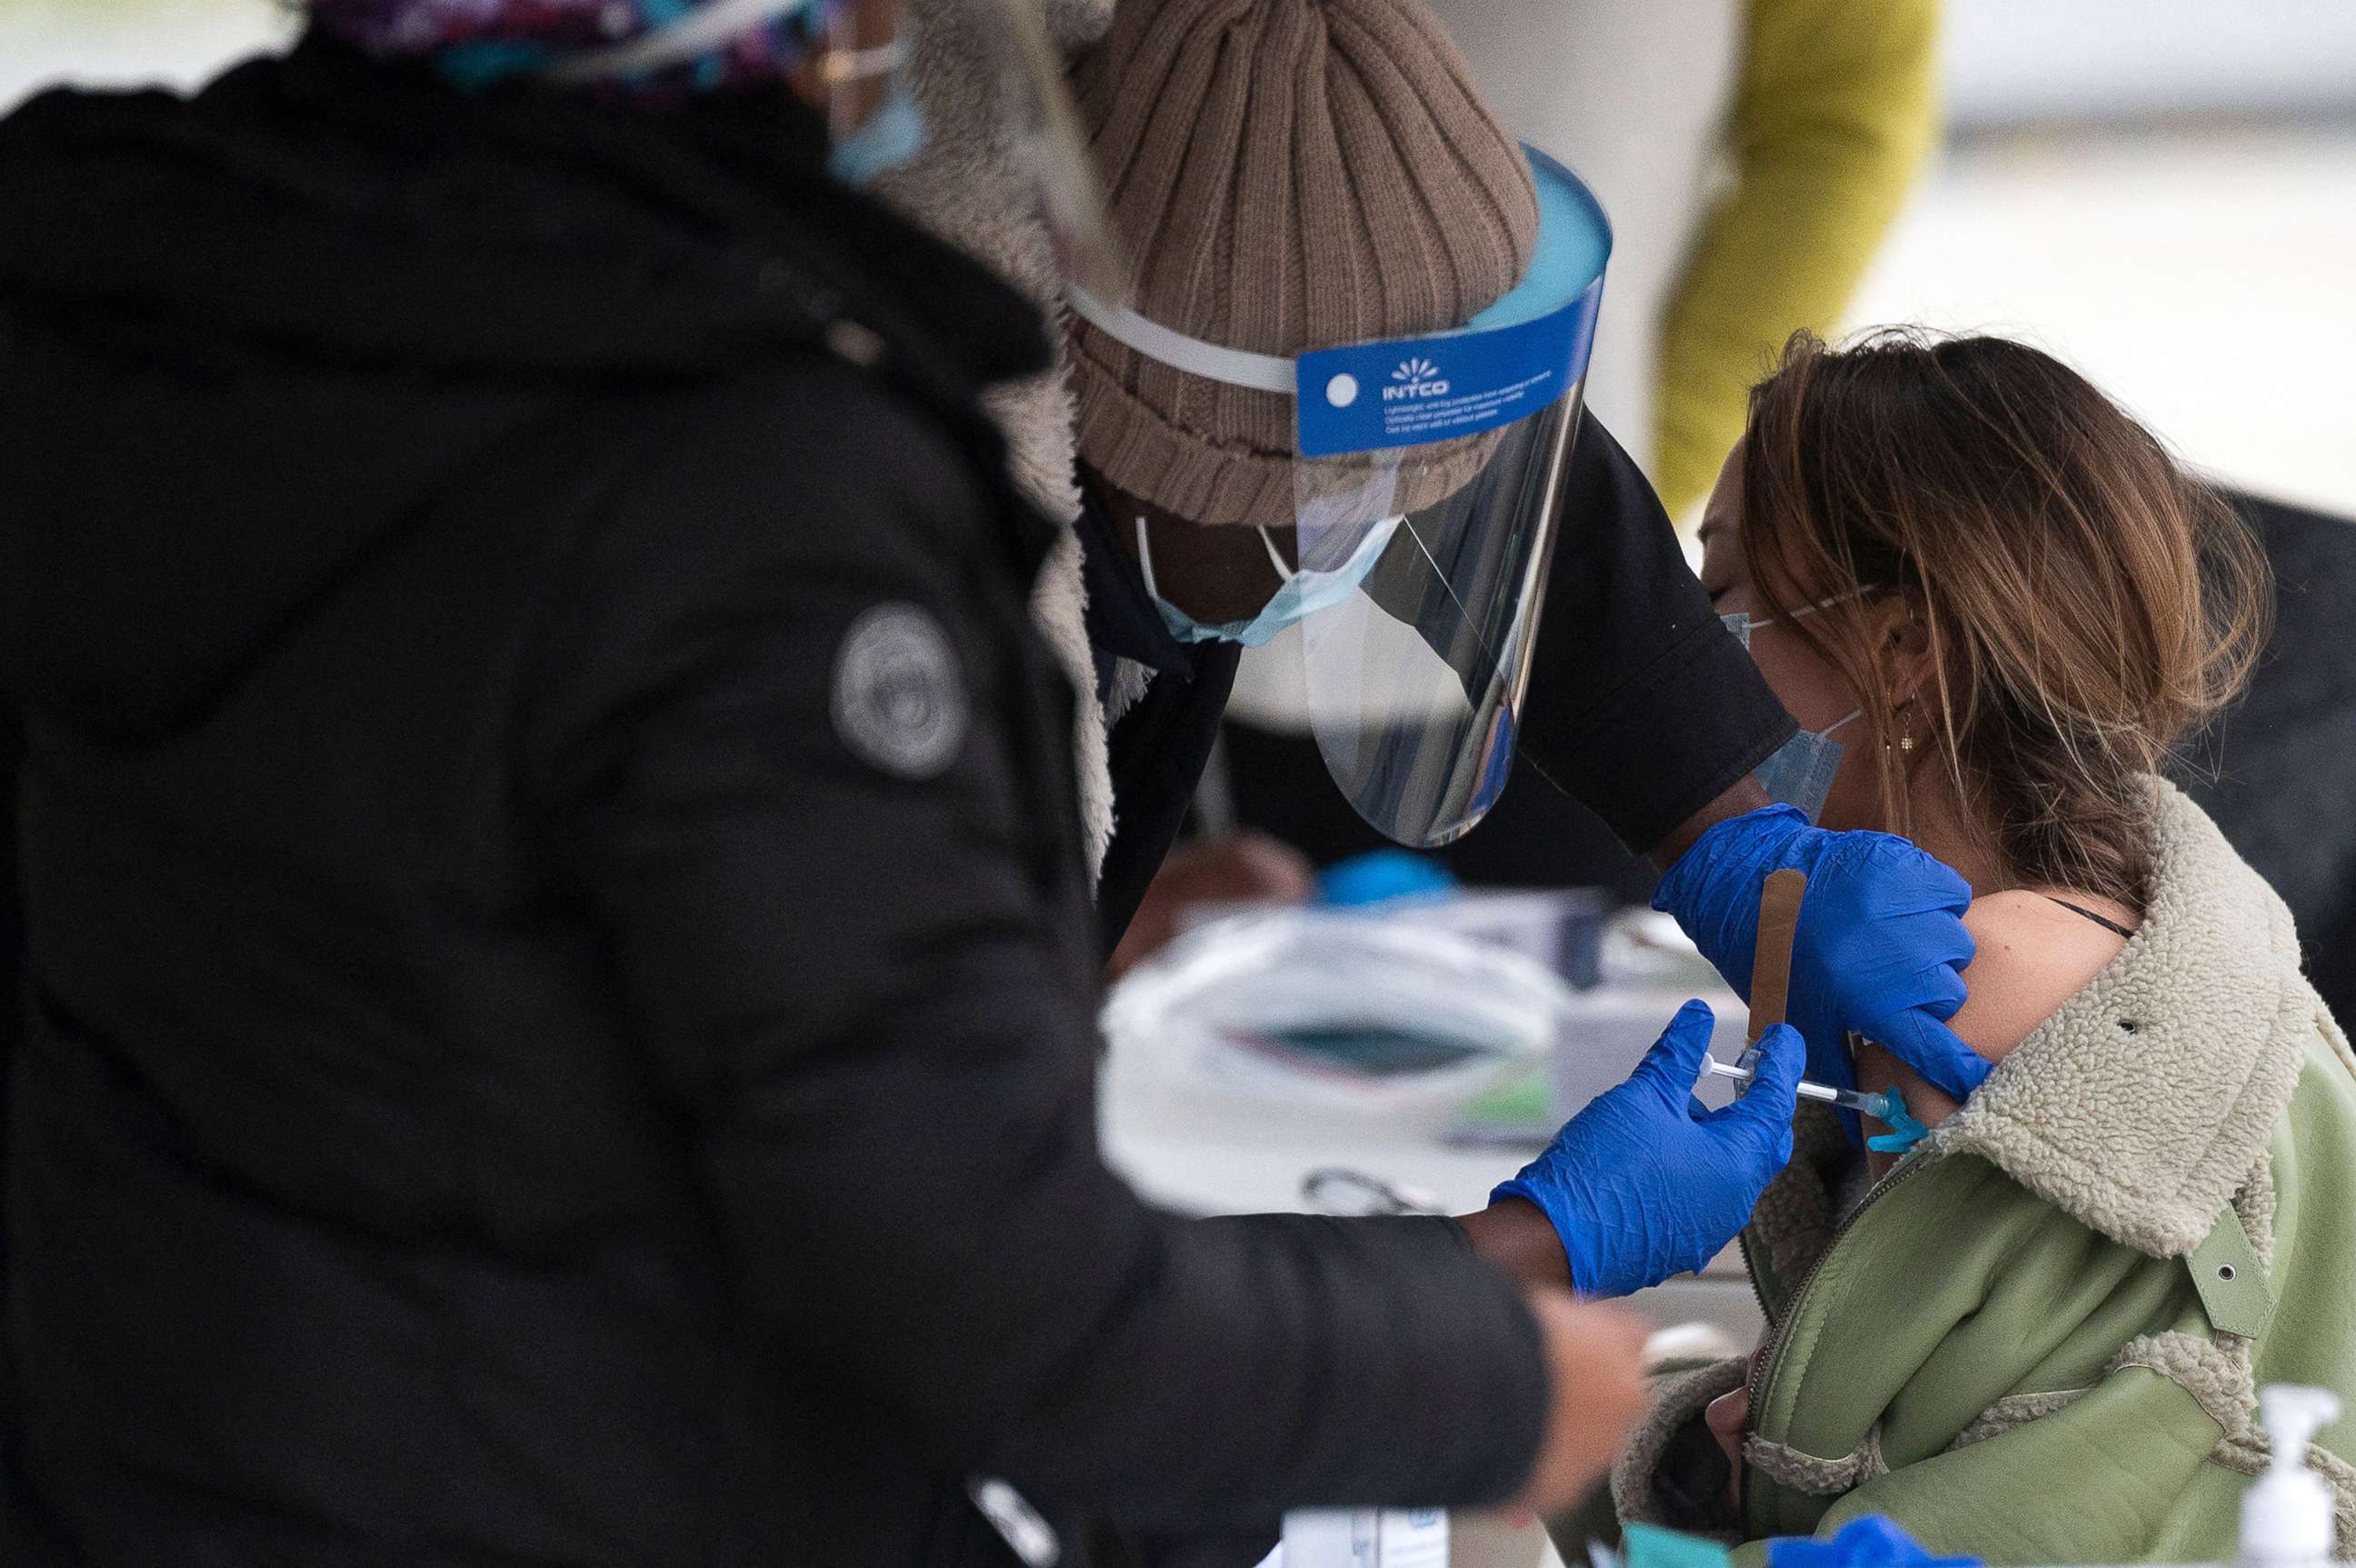 PHOTO: In this Nov. 29, 2021, file photo, a person gets a Covid-19 vaccination at an outdoor walk-up vaccination site within Franklin Park in Washington, D.C.